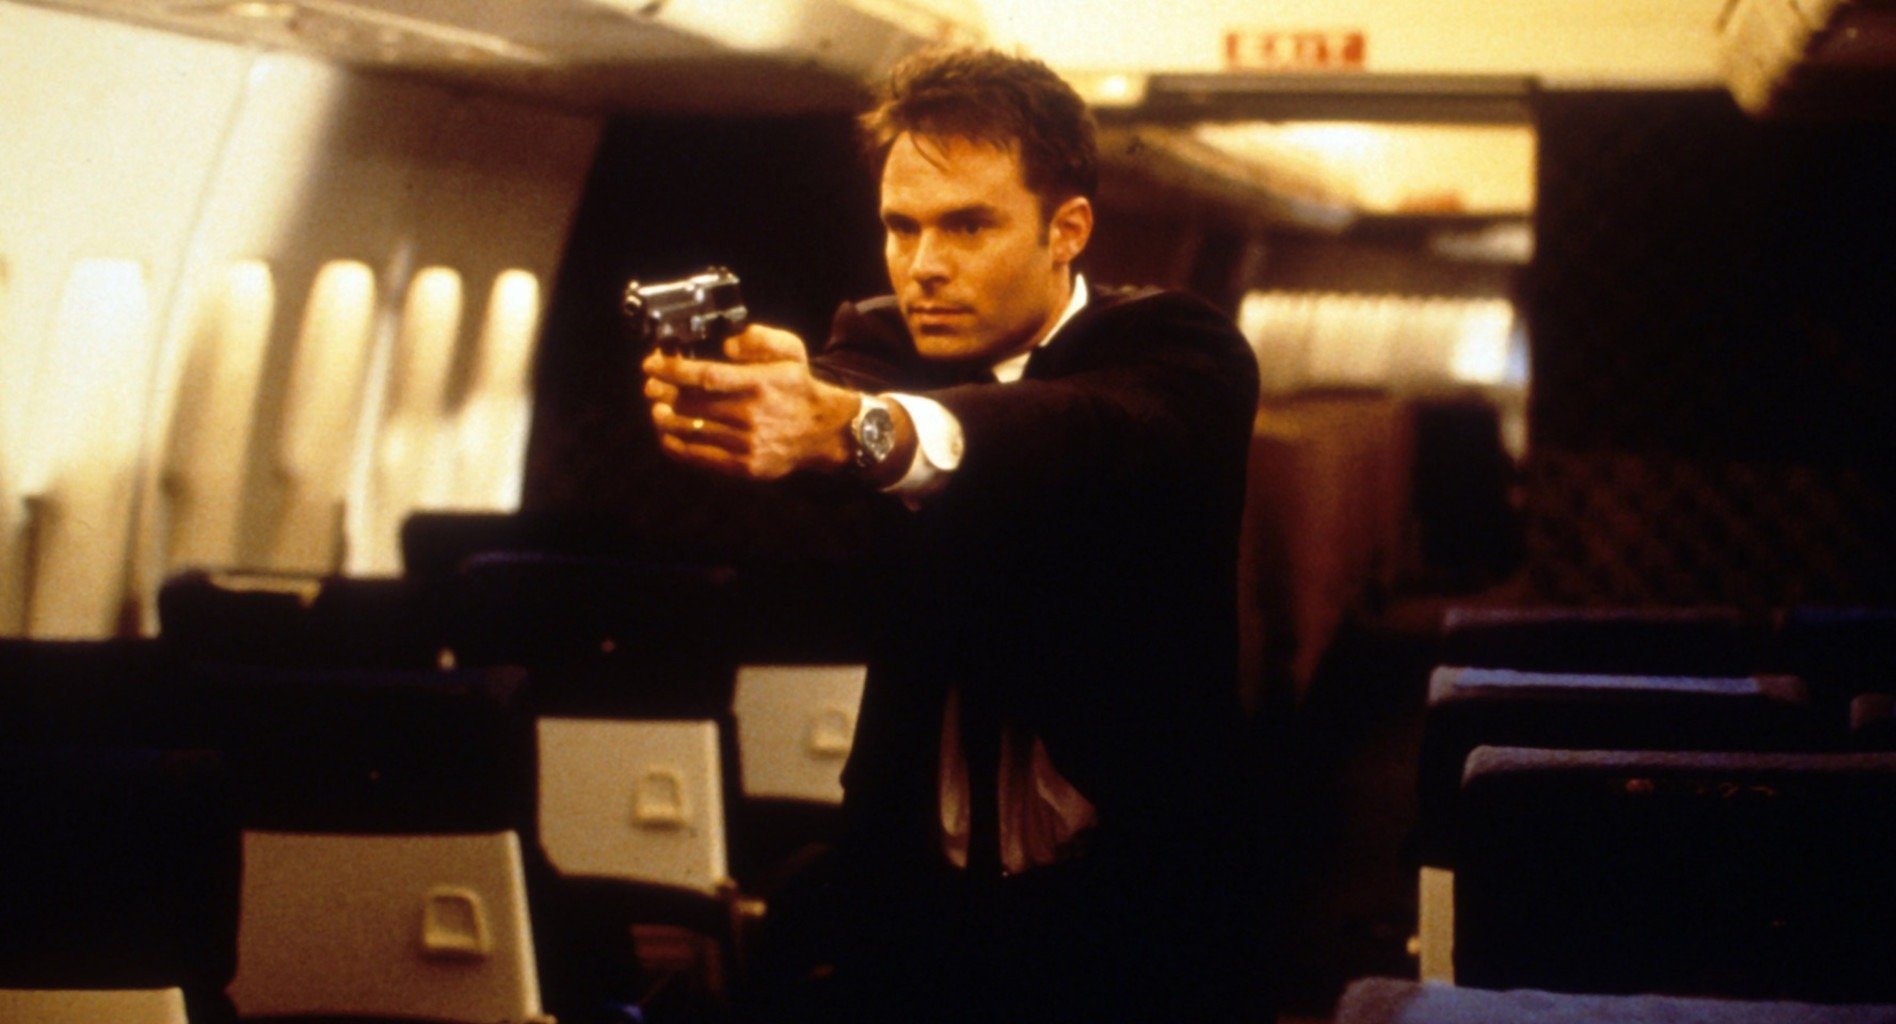 Patrick Muldoon as Secret Service agent Mike Connelly in Chain of Command (2000)